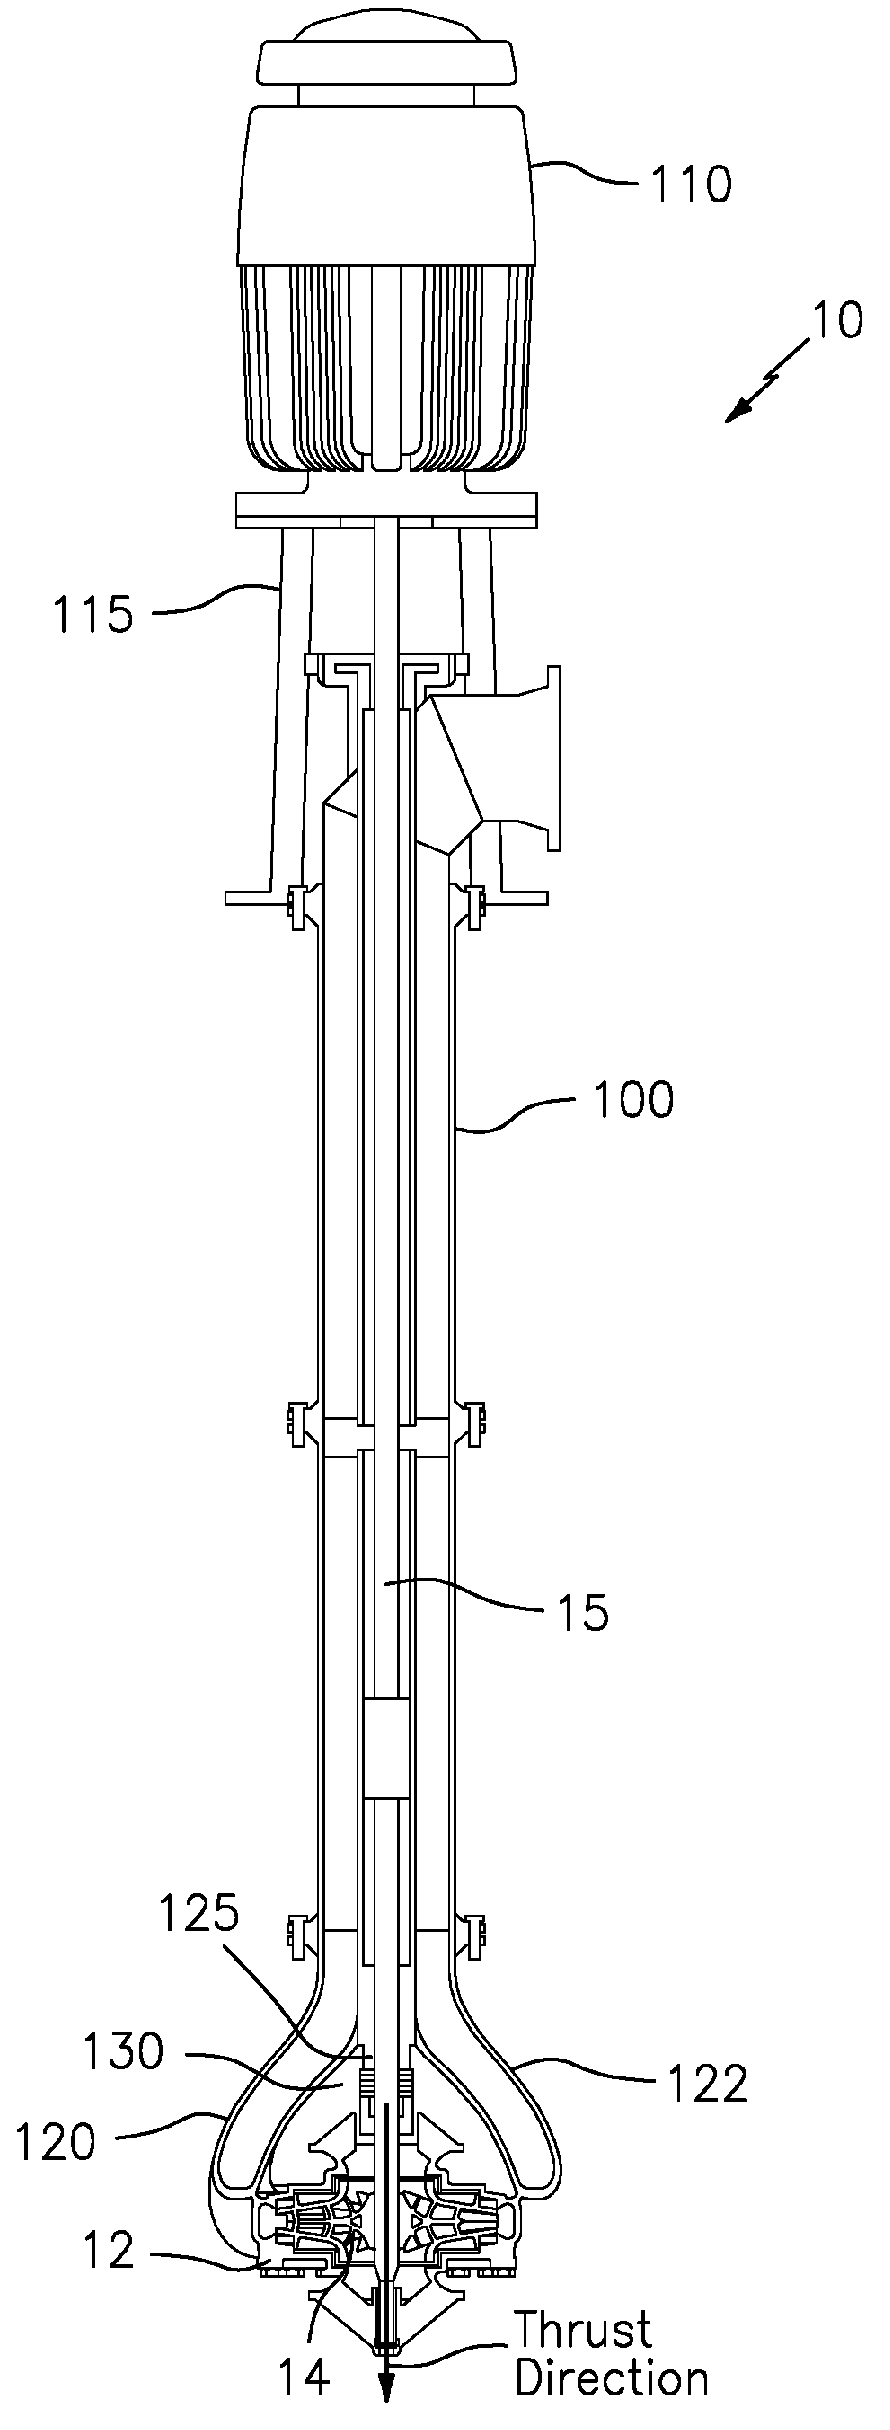 Vertical double-suction pump having beneficial axial thrust